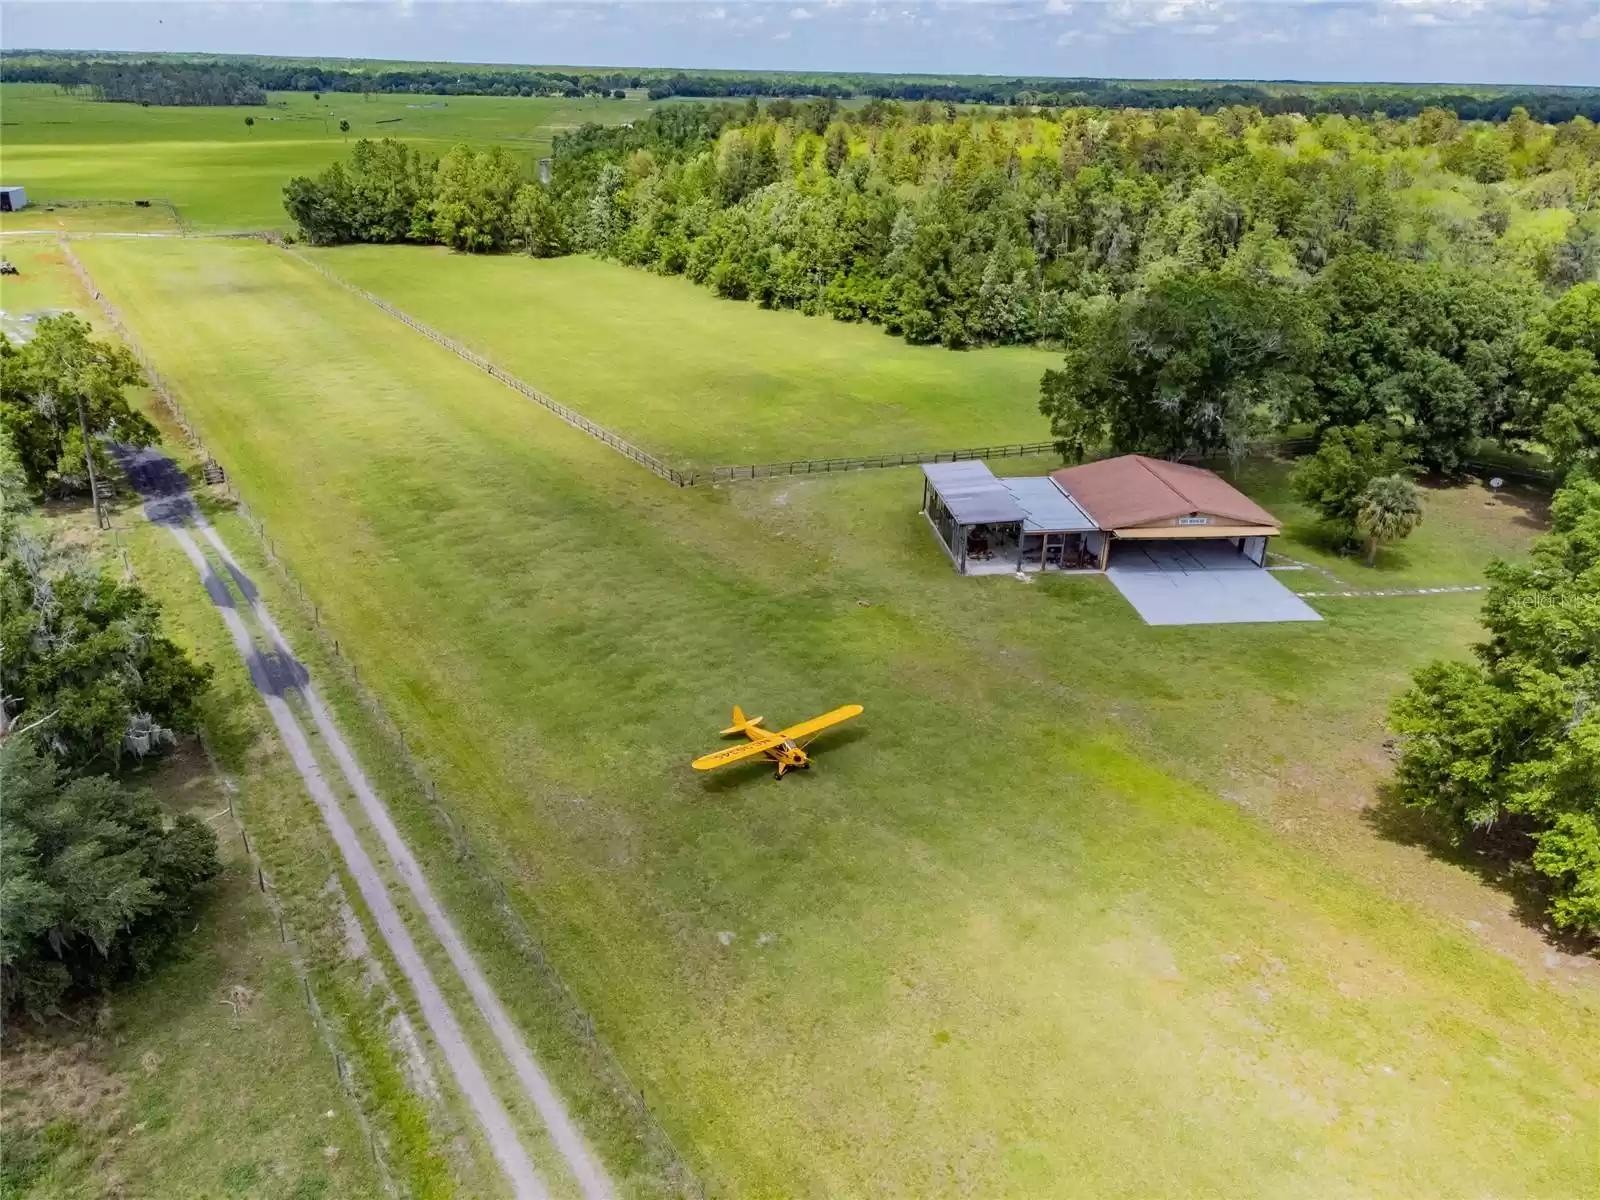 Serene and private location make this property a sought after retreat for pilots, aviation enthusiasts, and nature lovers alike.